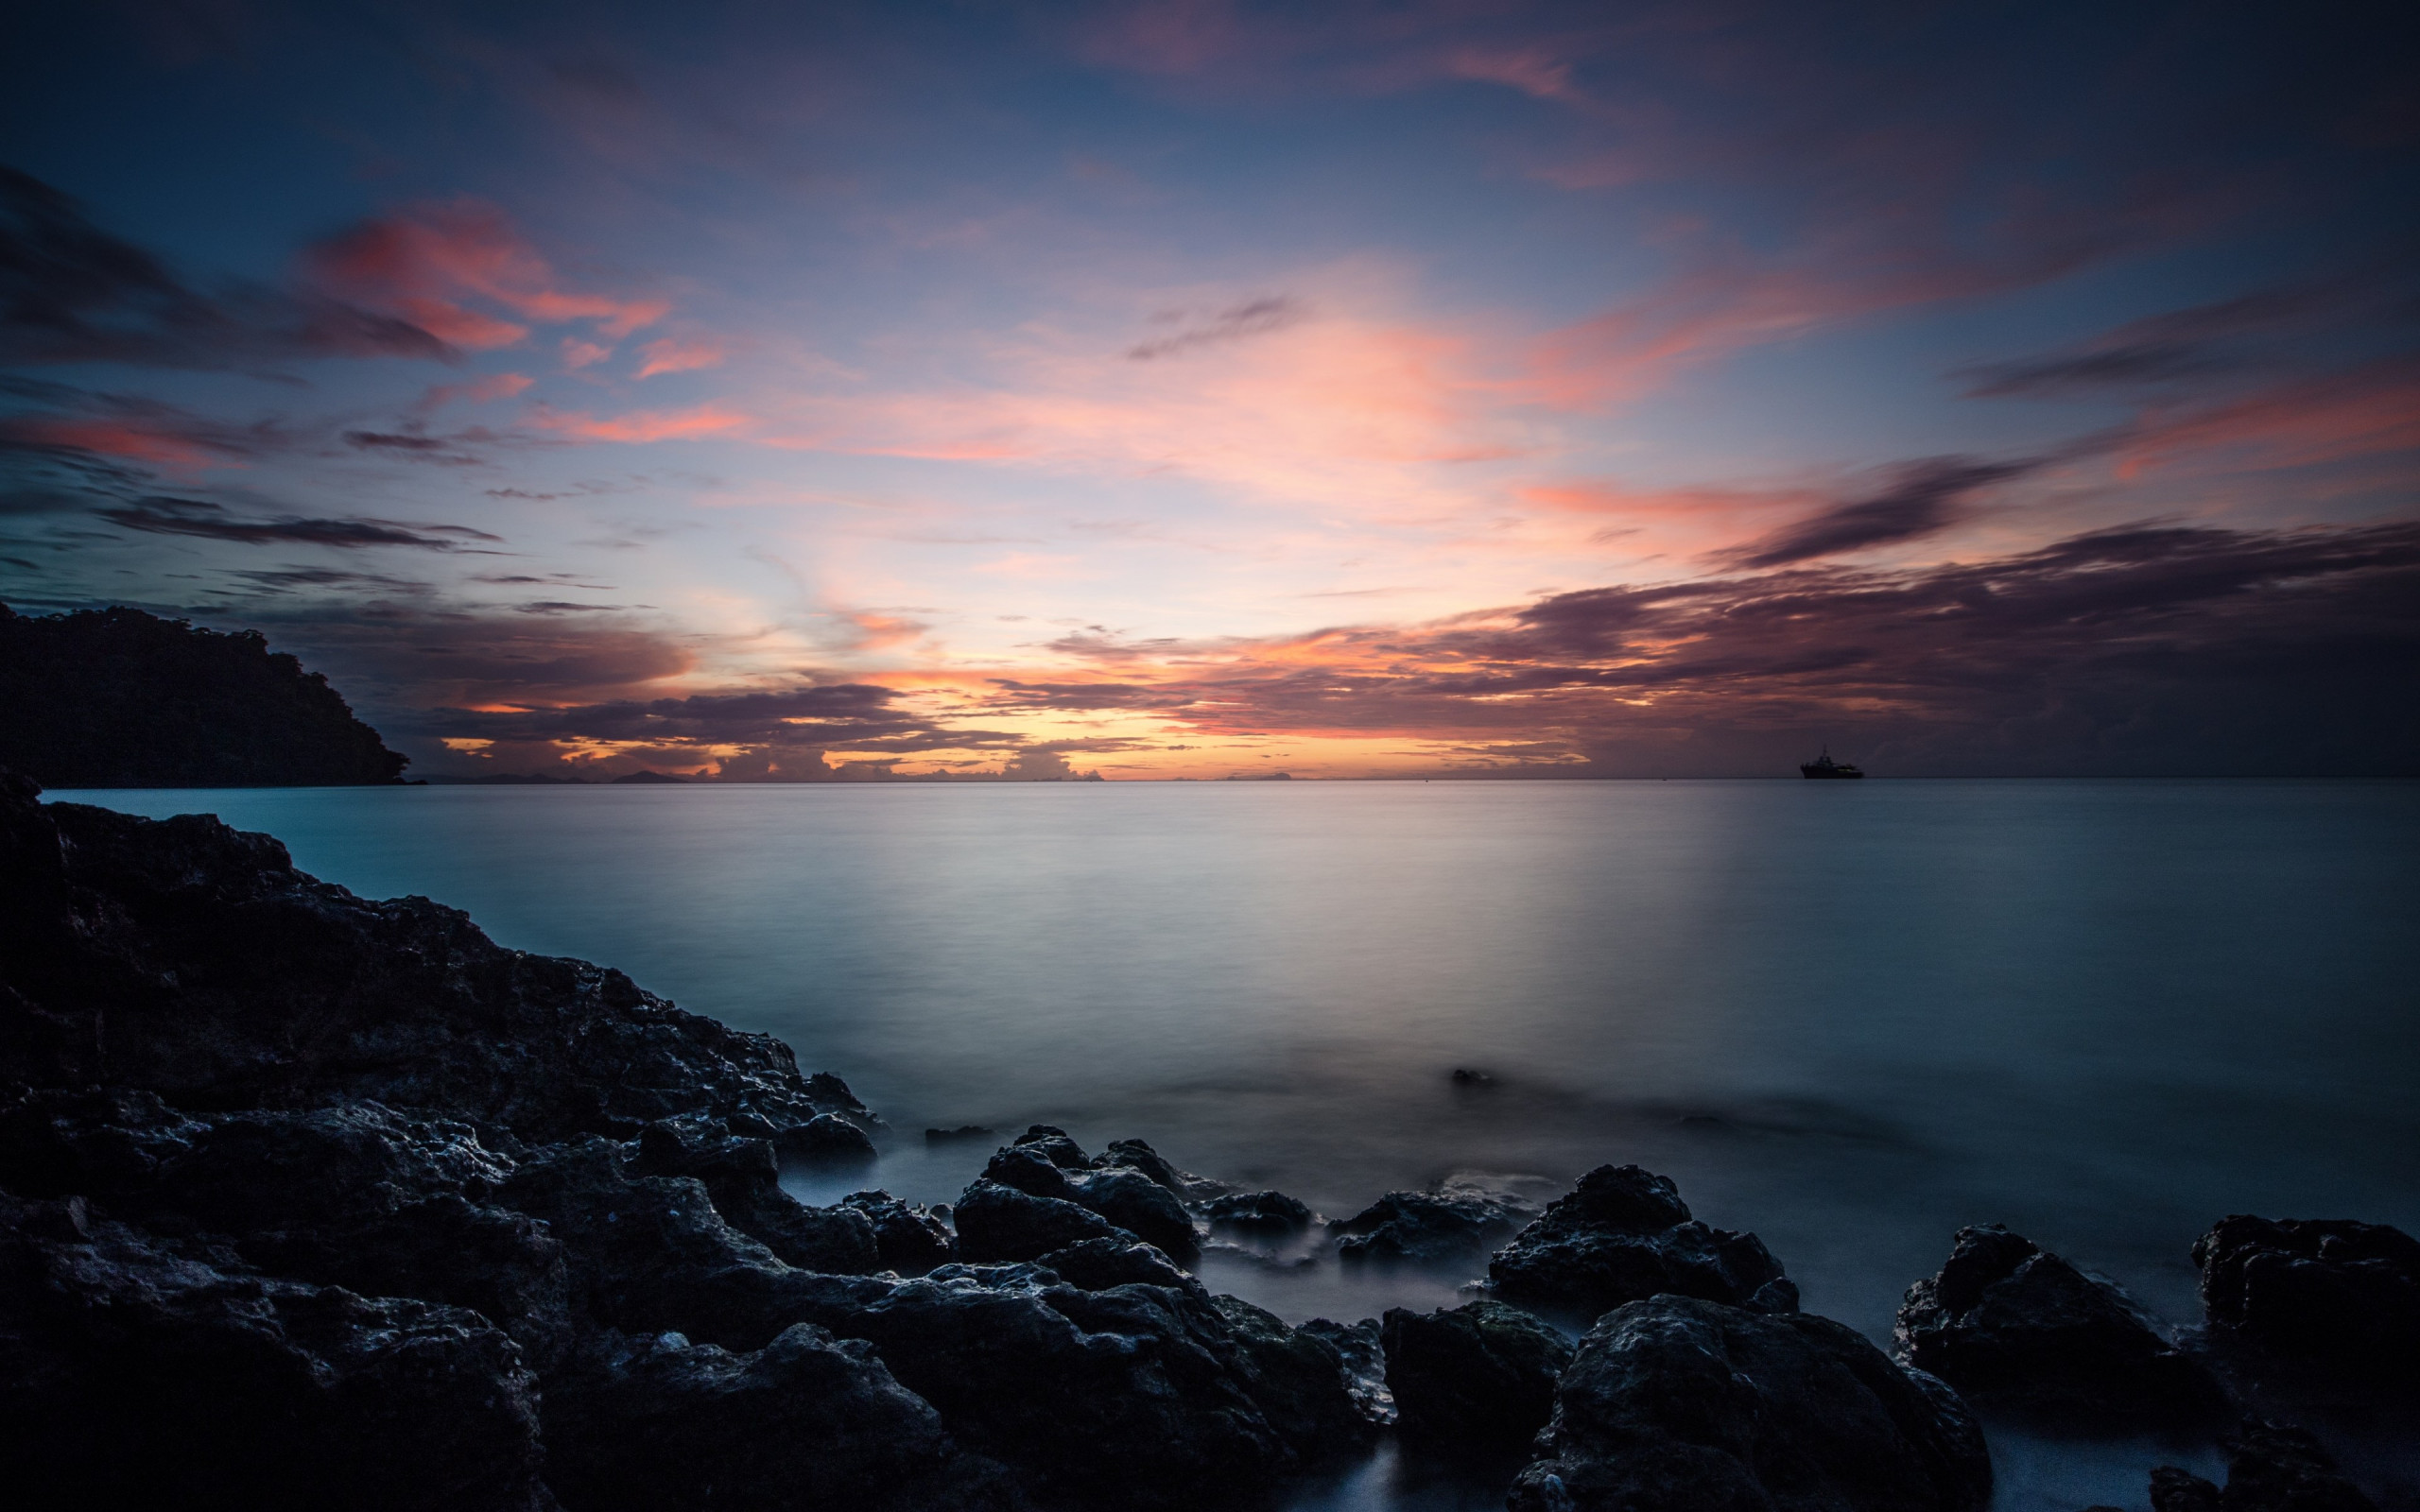 Sunset, rocks, clouds, view from Thailand wallpaper 2560x1600